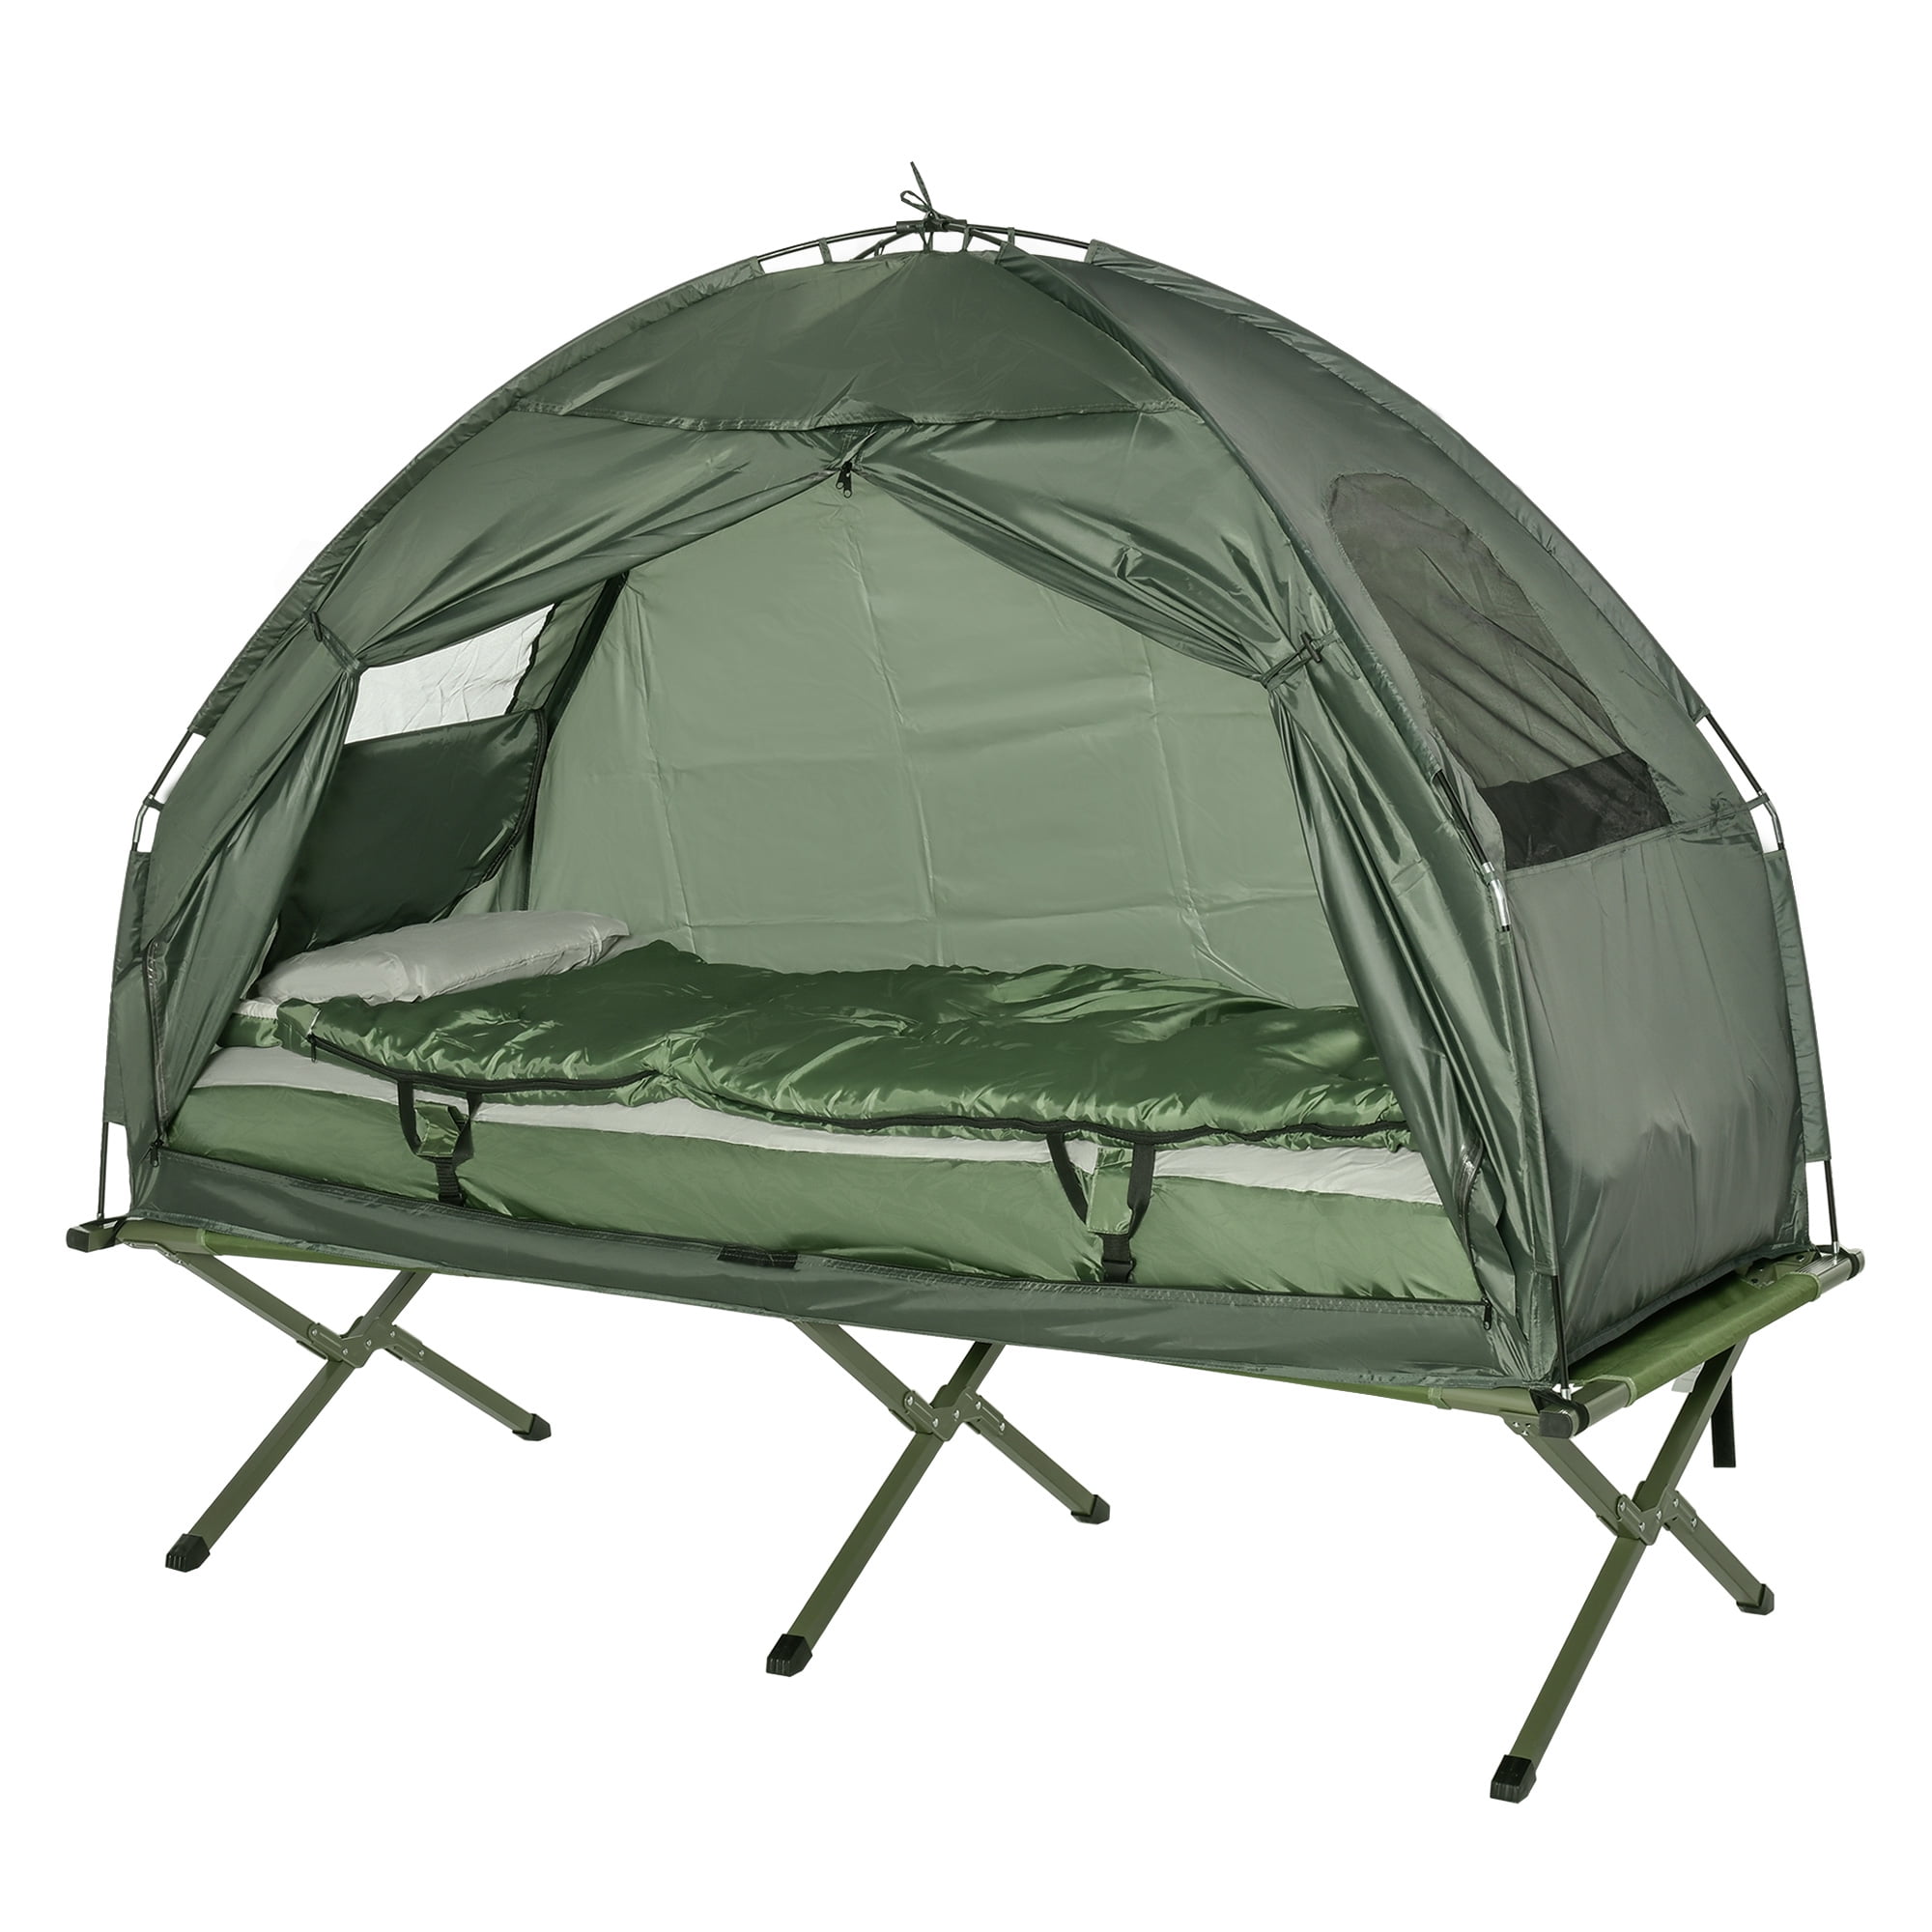 Elevated Camping Tent with Carry Bag for Outdoor Activity Hiking Moccha Folding Camping Tent Cot with Sleeping Bag and Air Mattress Picnic 